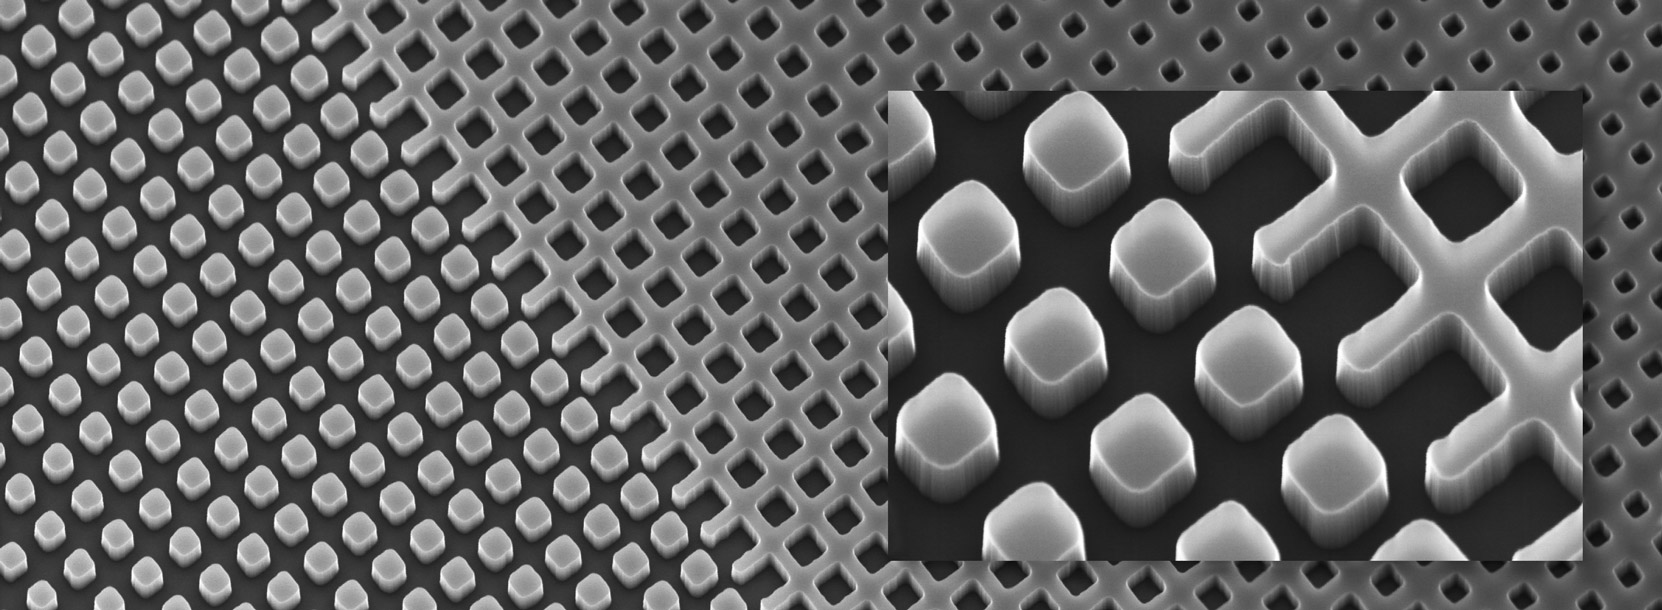 SEM image of a grating structure with two different kinds of sub-wavelength entities, i.e. pillars and voids.